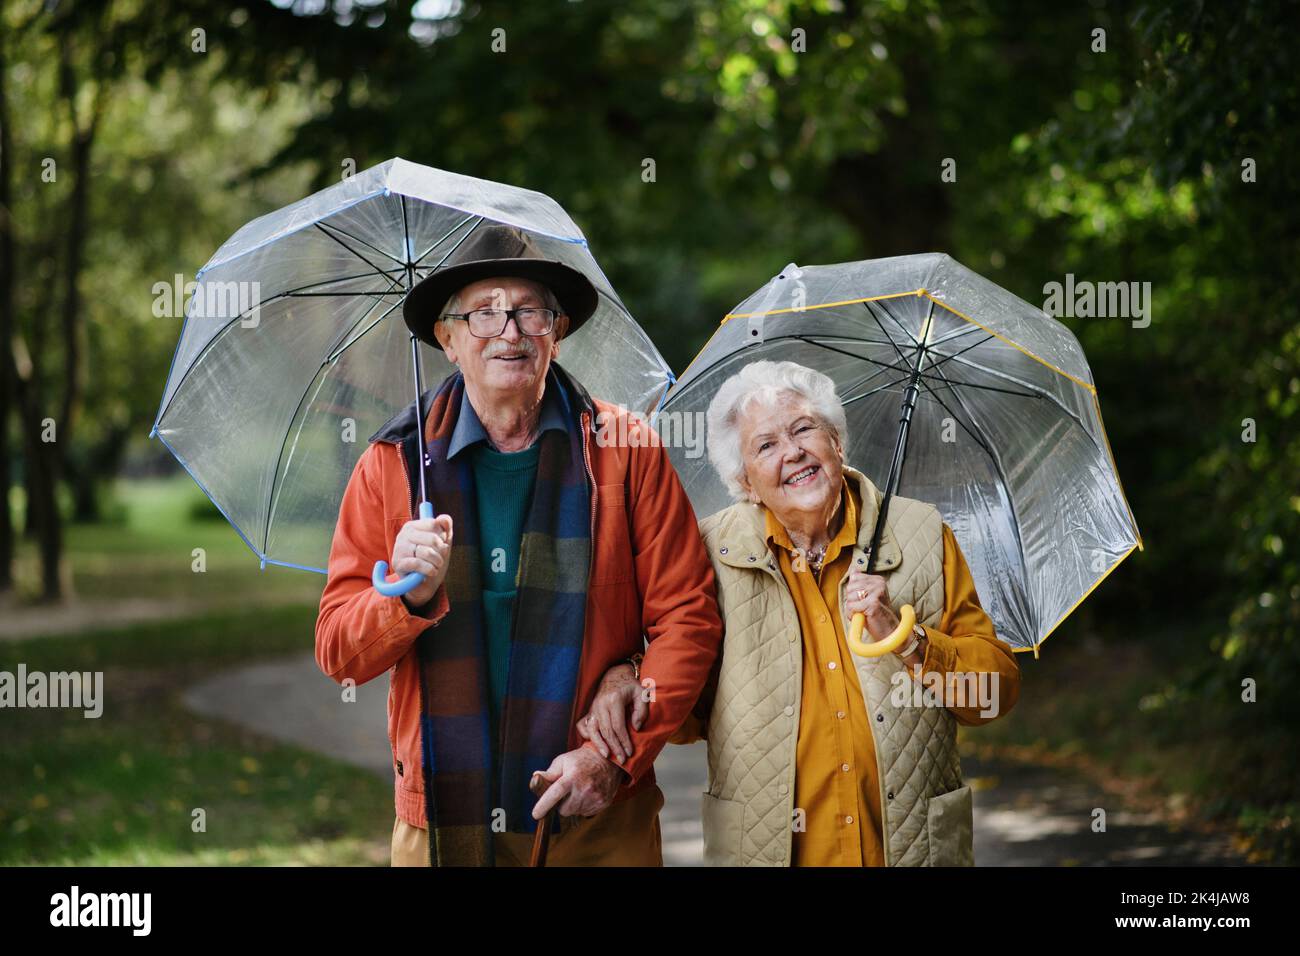 Happy senior couple walking with umbrellas in city park together. Stock Photo